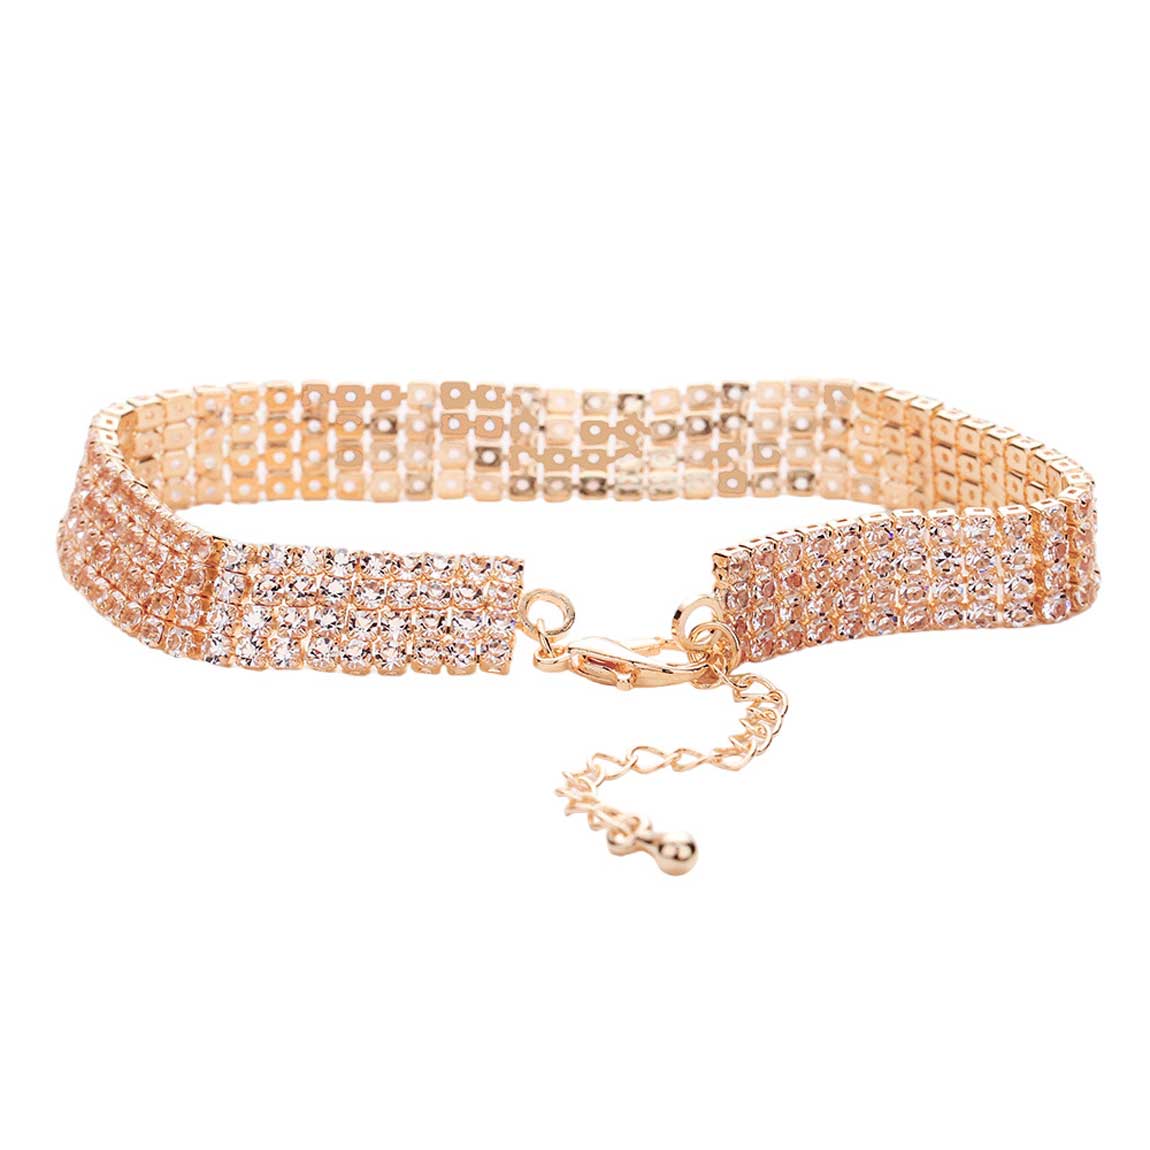 Rose Gold 4 Row Crystal Rhinestone Embellished Tennis Evening Bracelet, These gorgeous Crystal Rhinestone pieces will show your class on any special occasion. These bracelets are perfect for any event whether formal or casual or for going to a party or special occasion. The perfect gift for a birthday, Party, Christmas, etc.